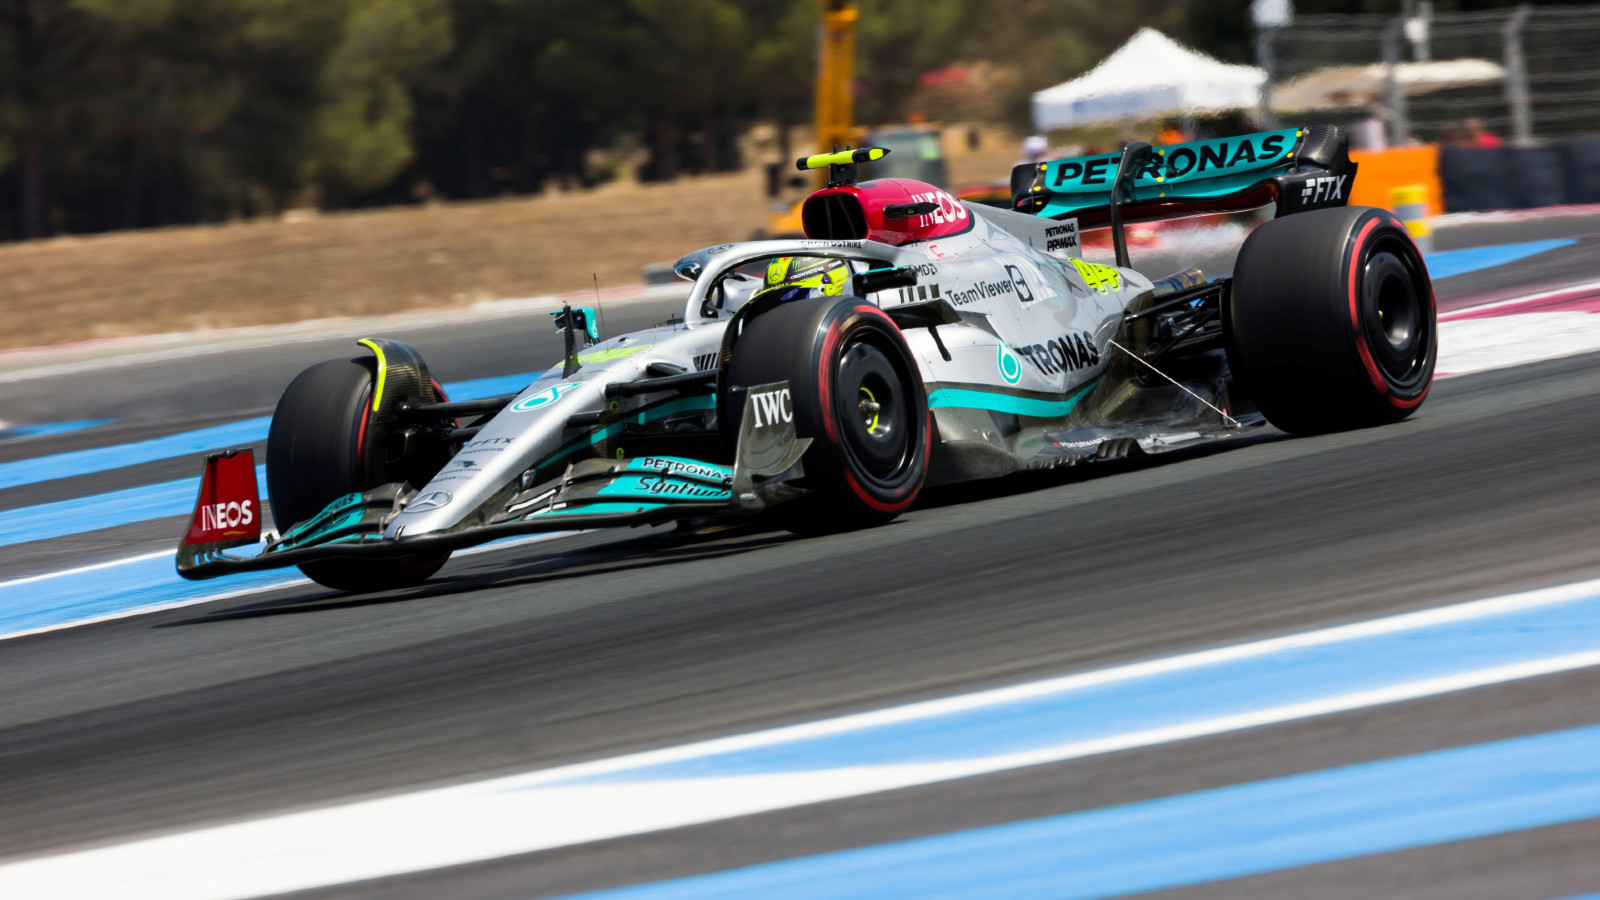 Mercedes' Lewis Hamilton on track during the French Grand Prix. Paul Ricard, July 2022.